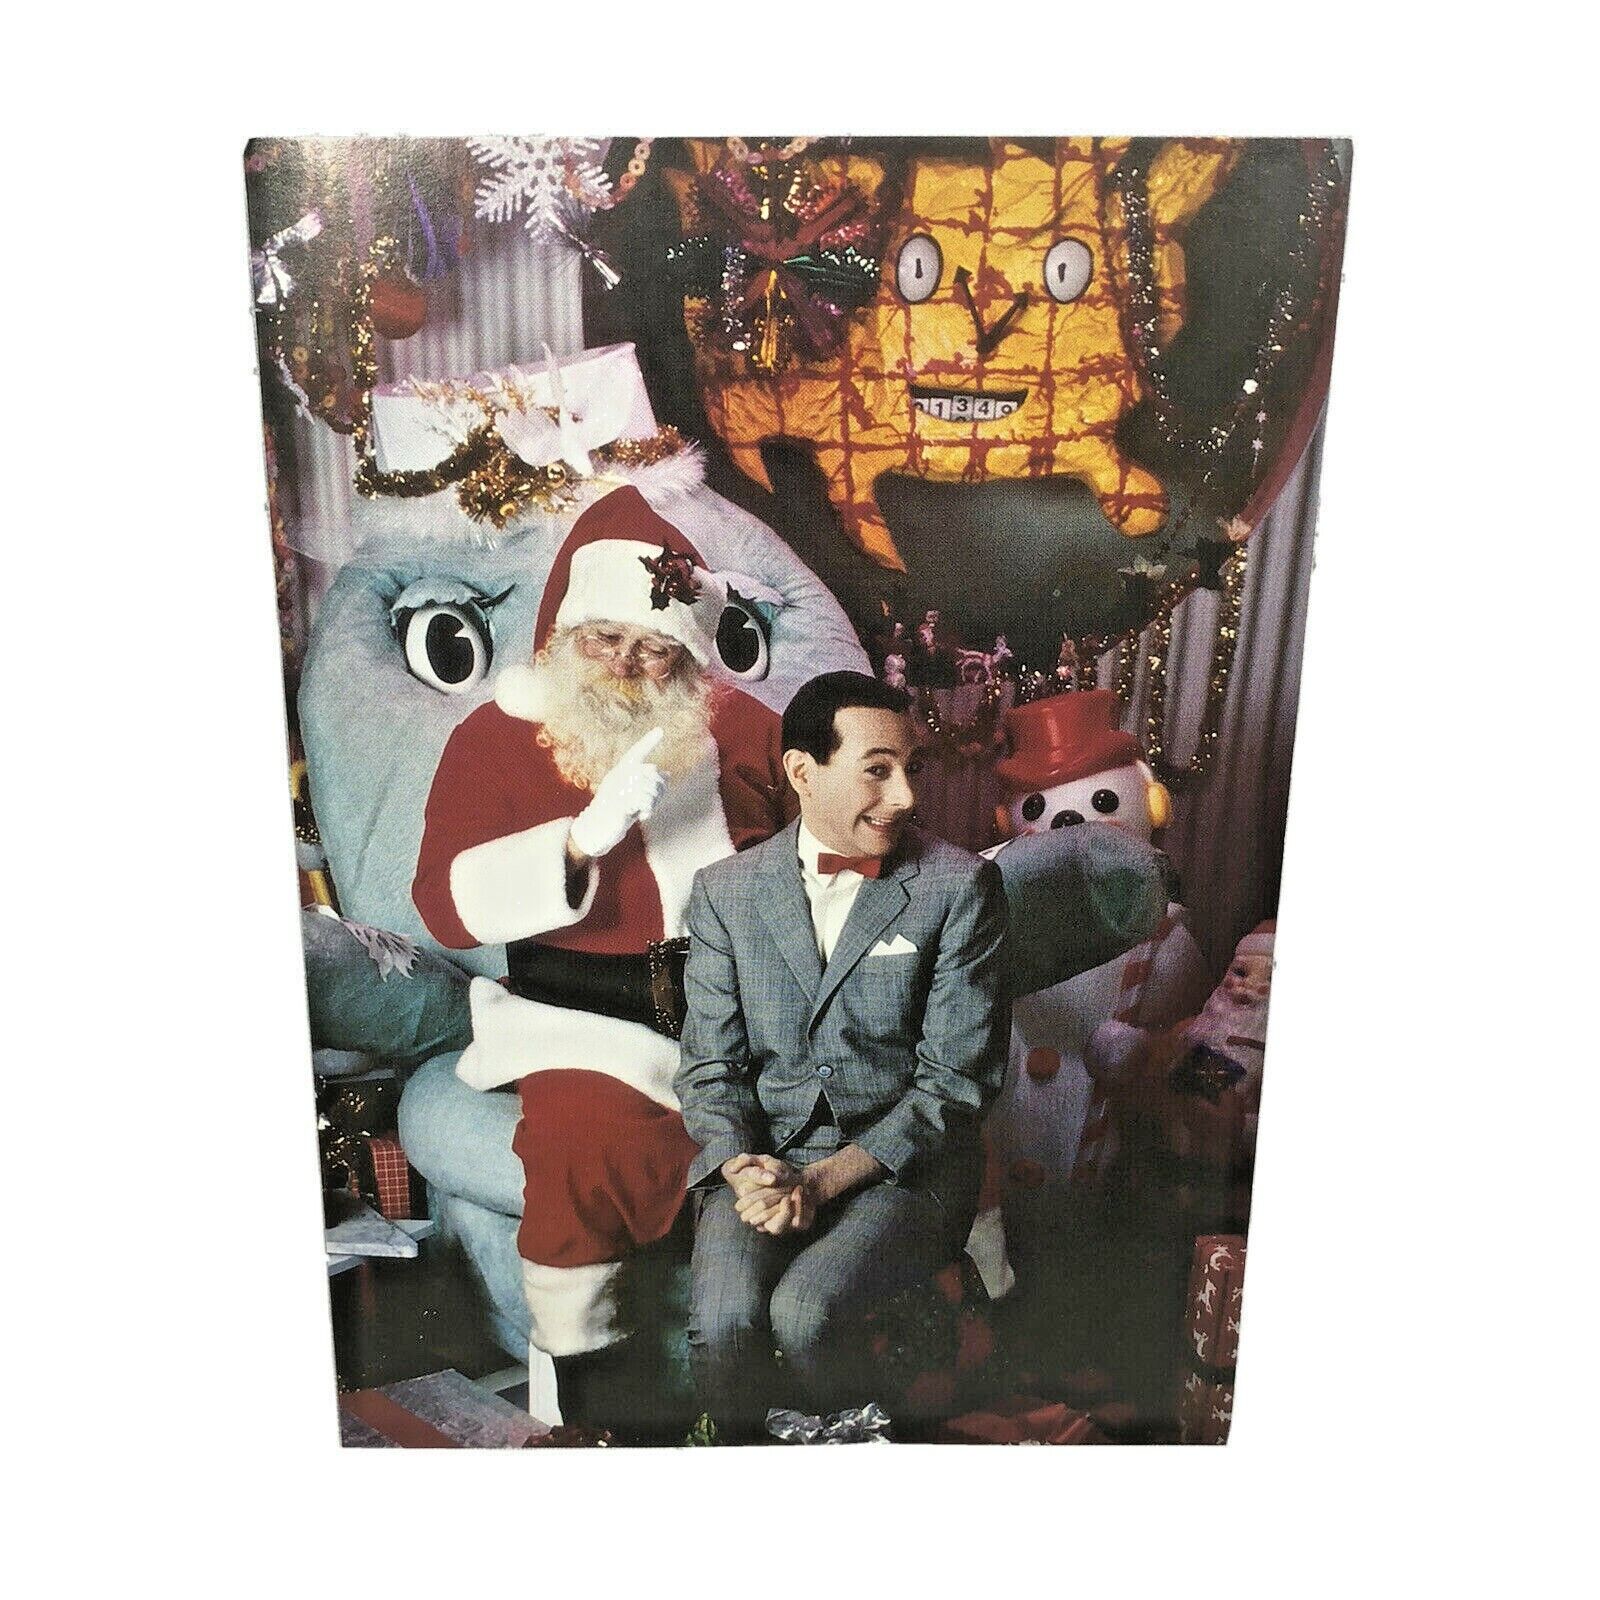 Vtg PEE-WEE HERMAN'S PLAYHOUSE Christmas Card on Chairry and Lap of Santa Claus